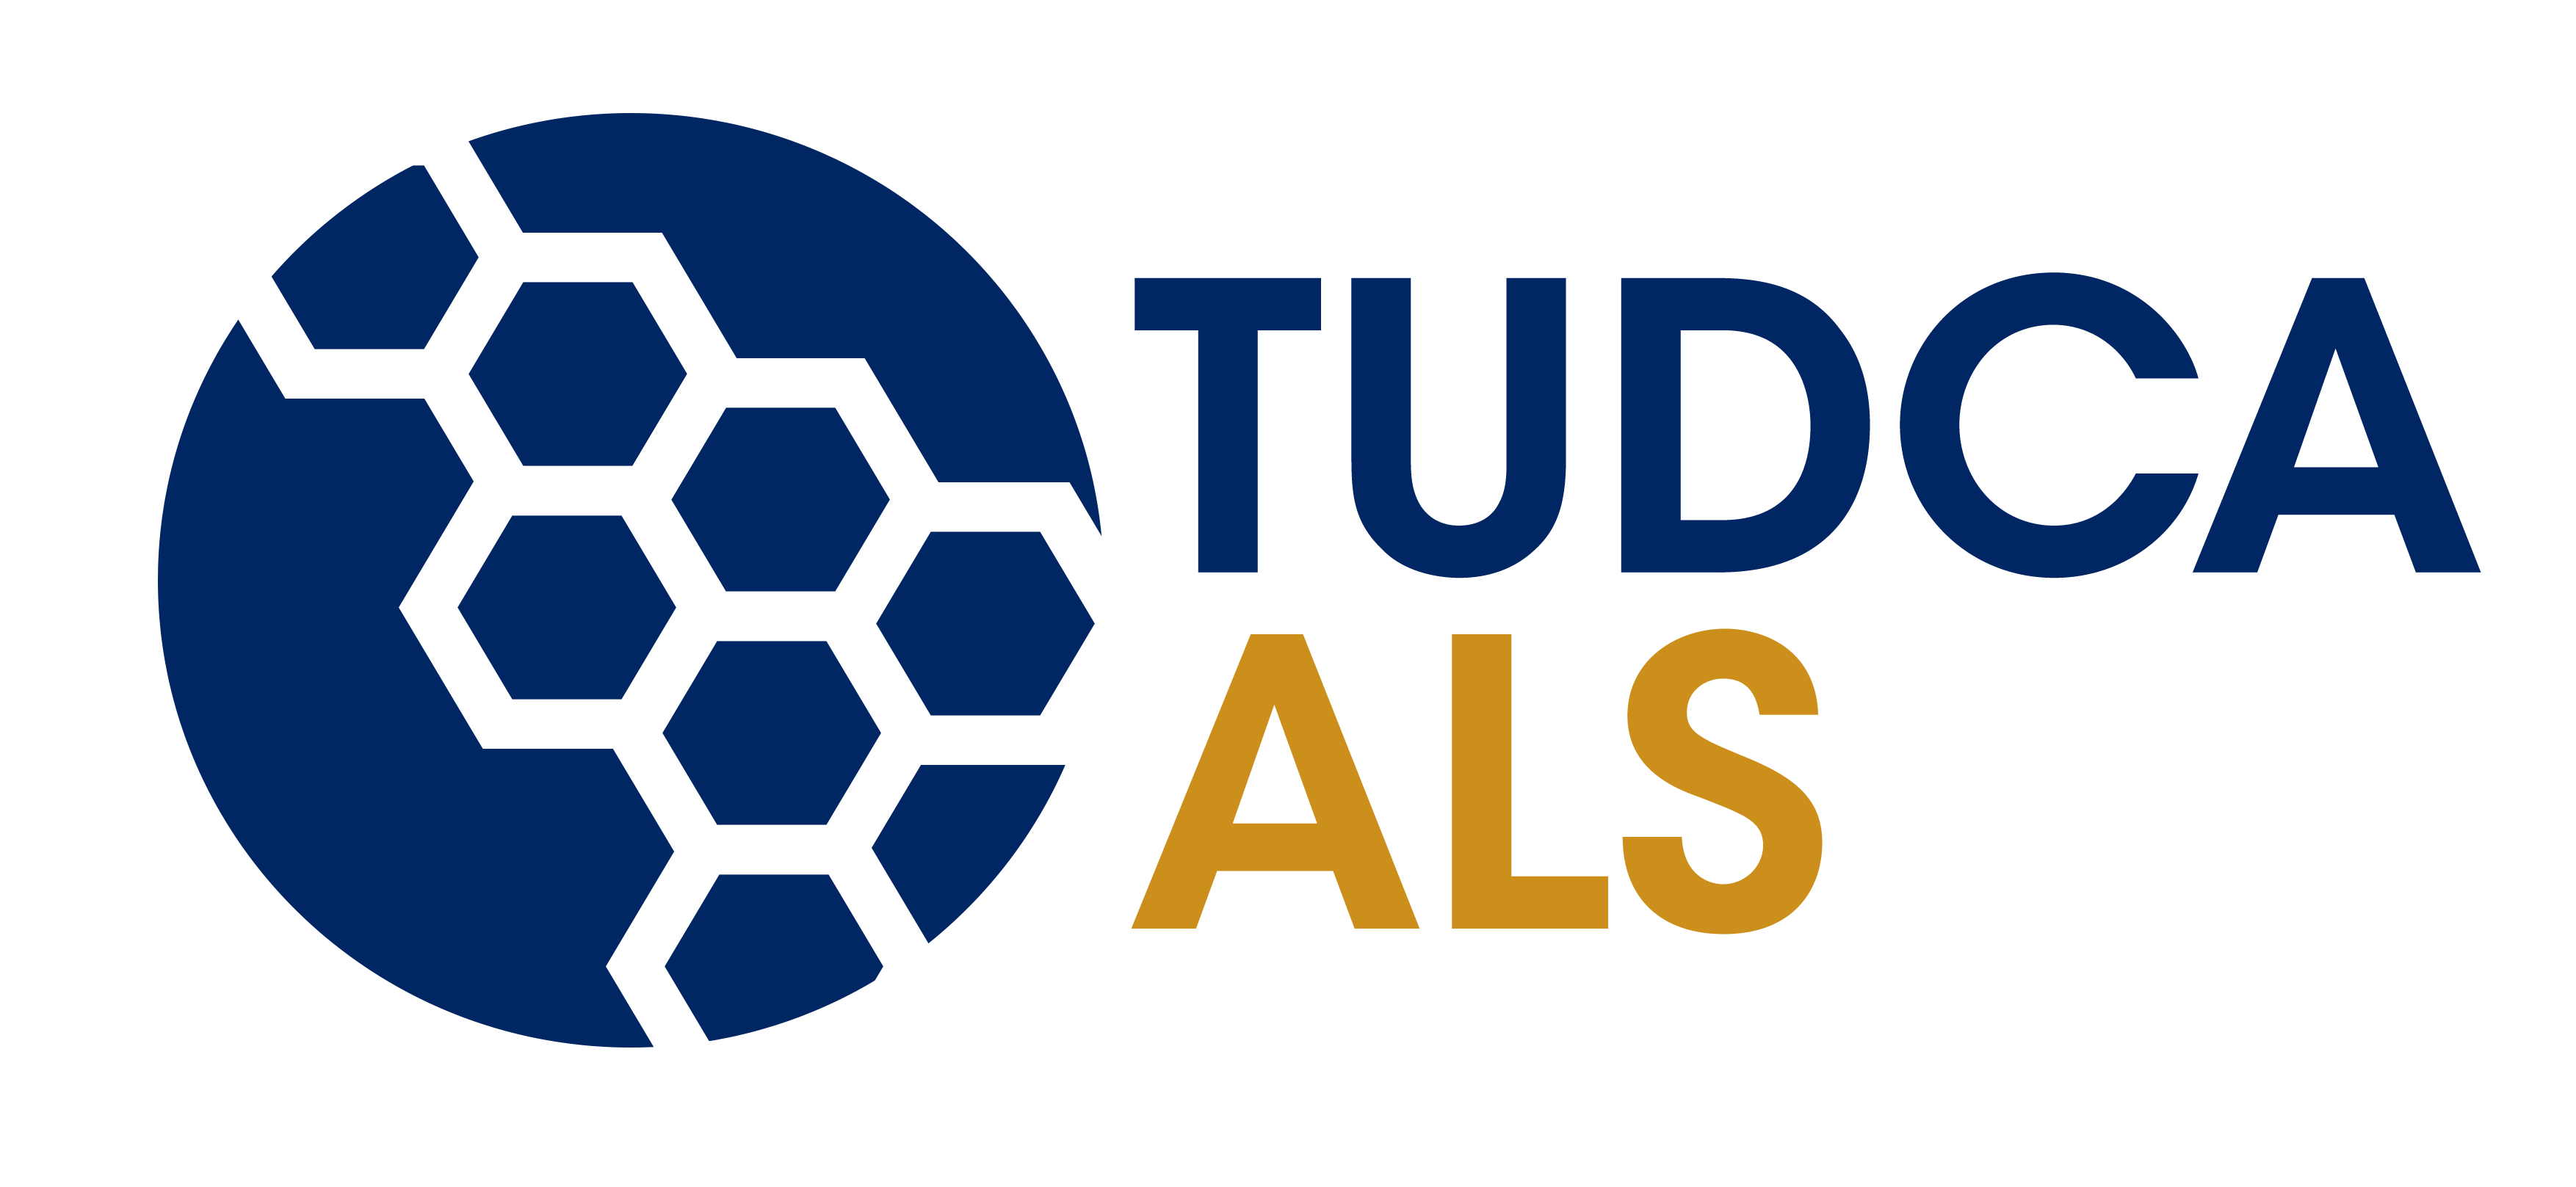 TUDCA-ALS has started recruiting in the UK